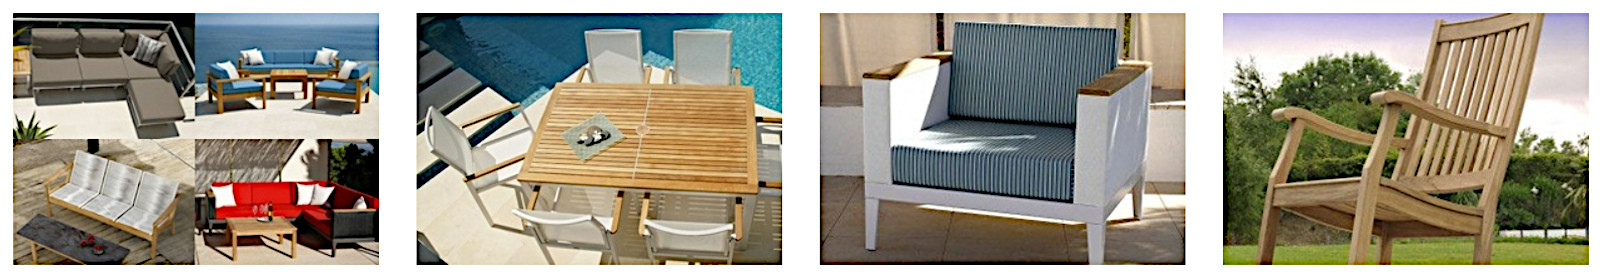 Barlow Tyrie outdoor furniture